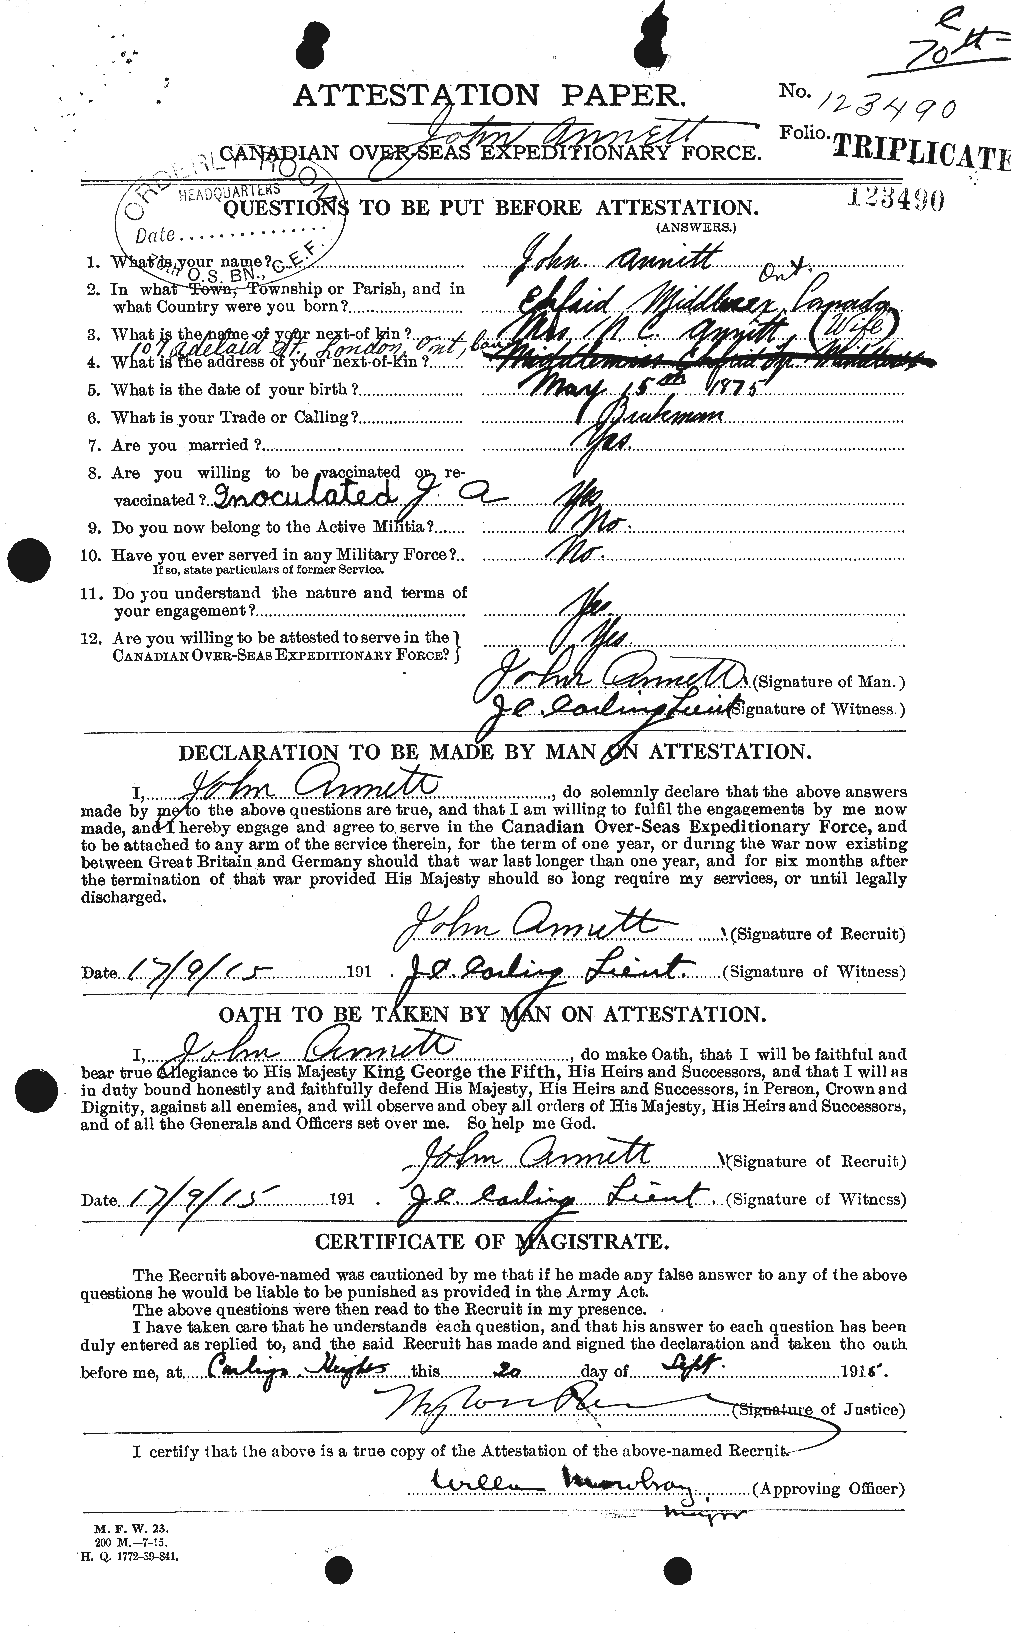 Personnel Records of the First World War - CEF 212384a